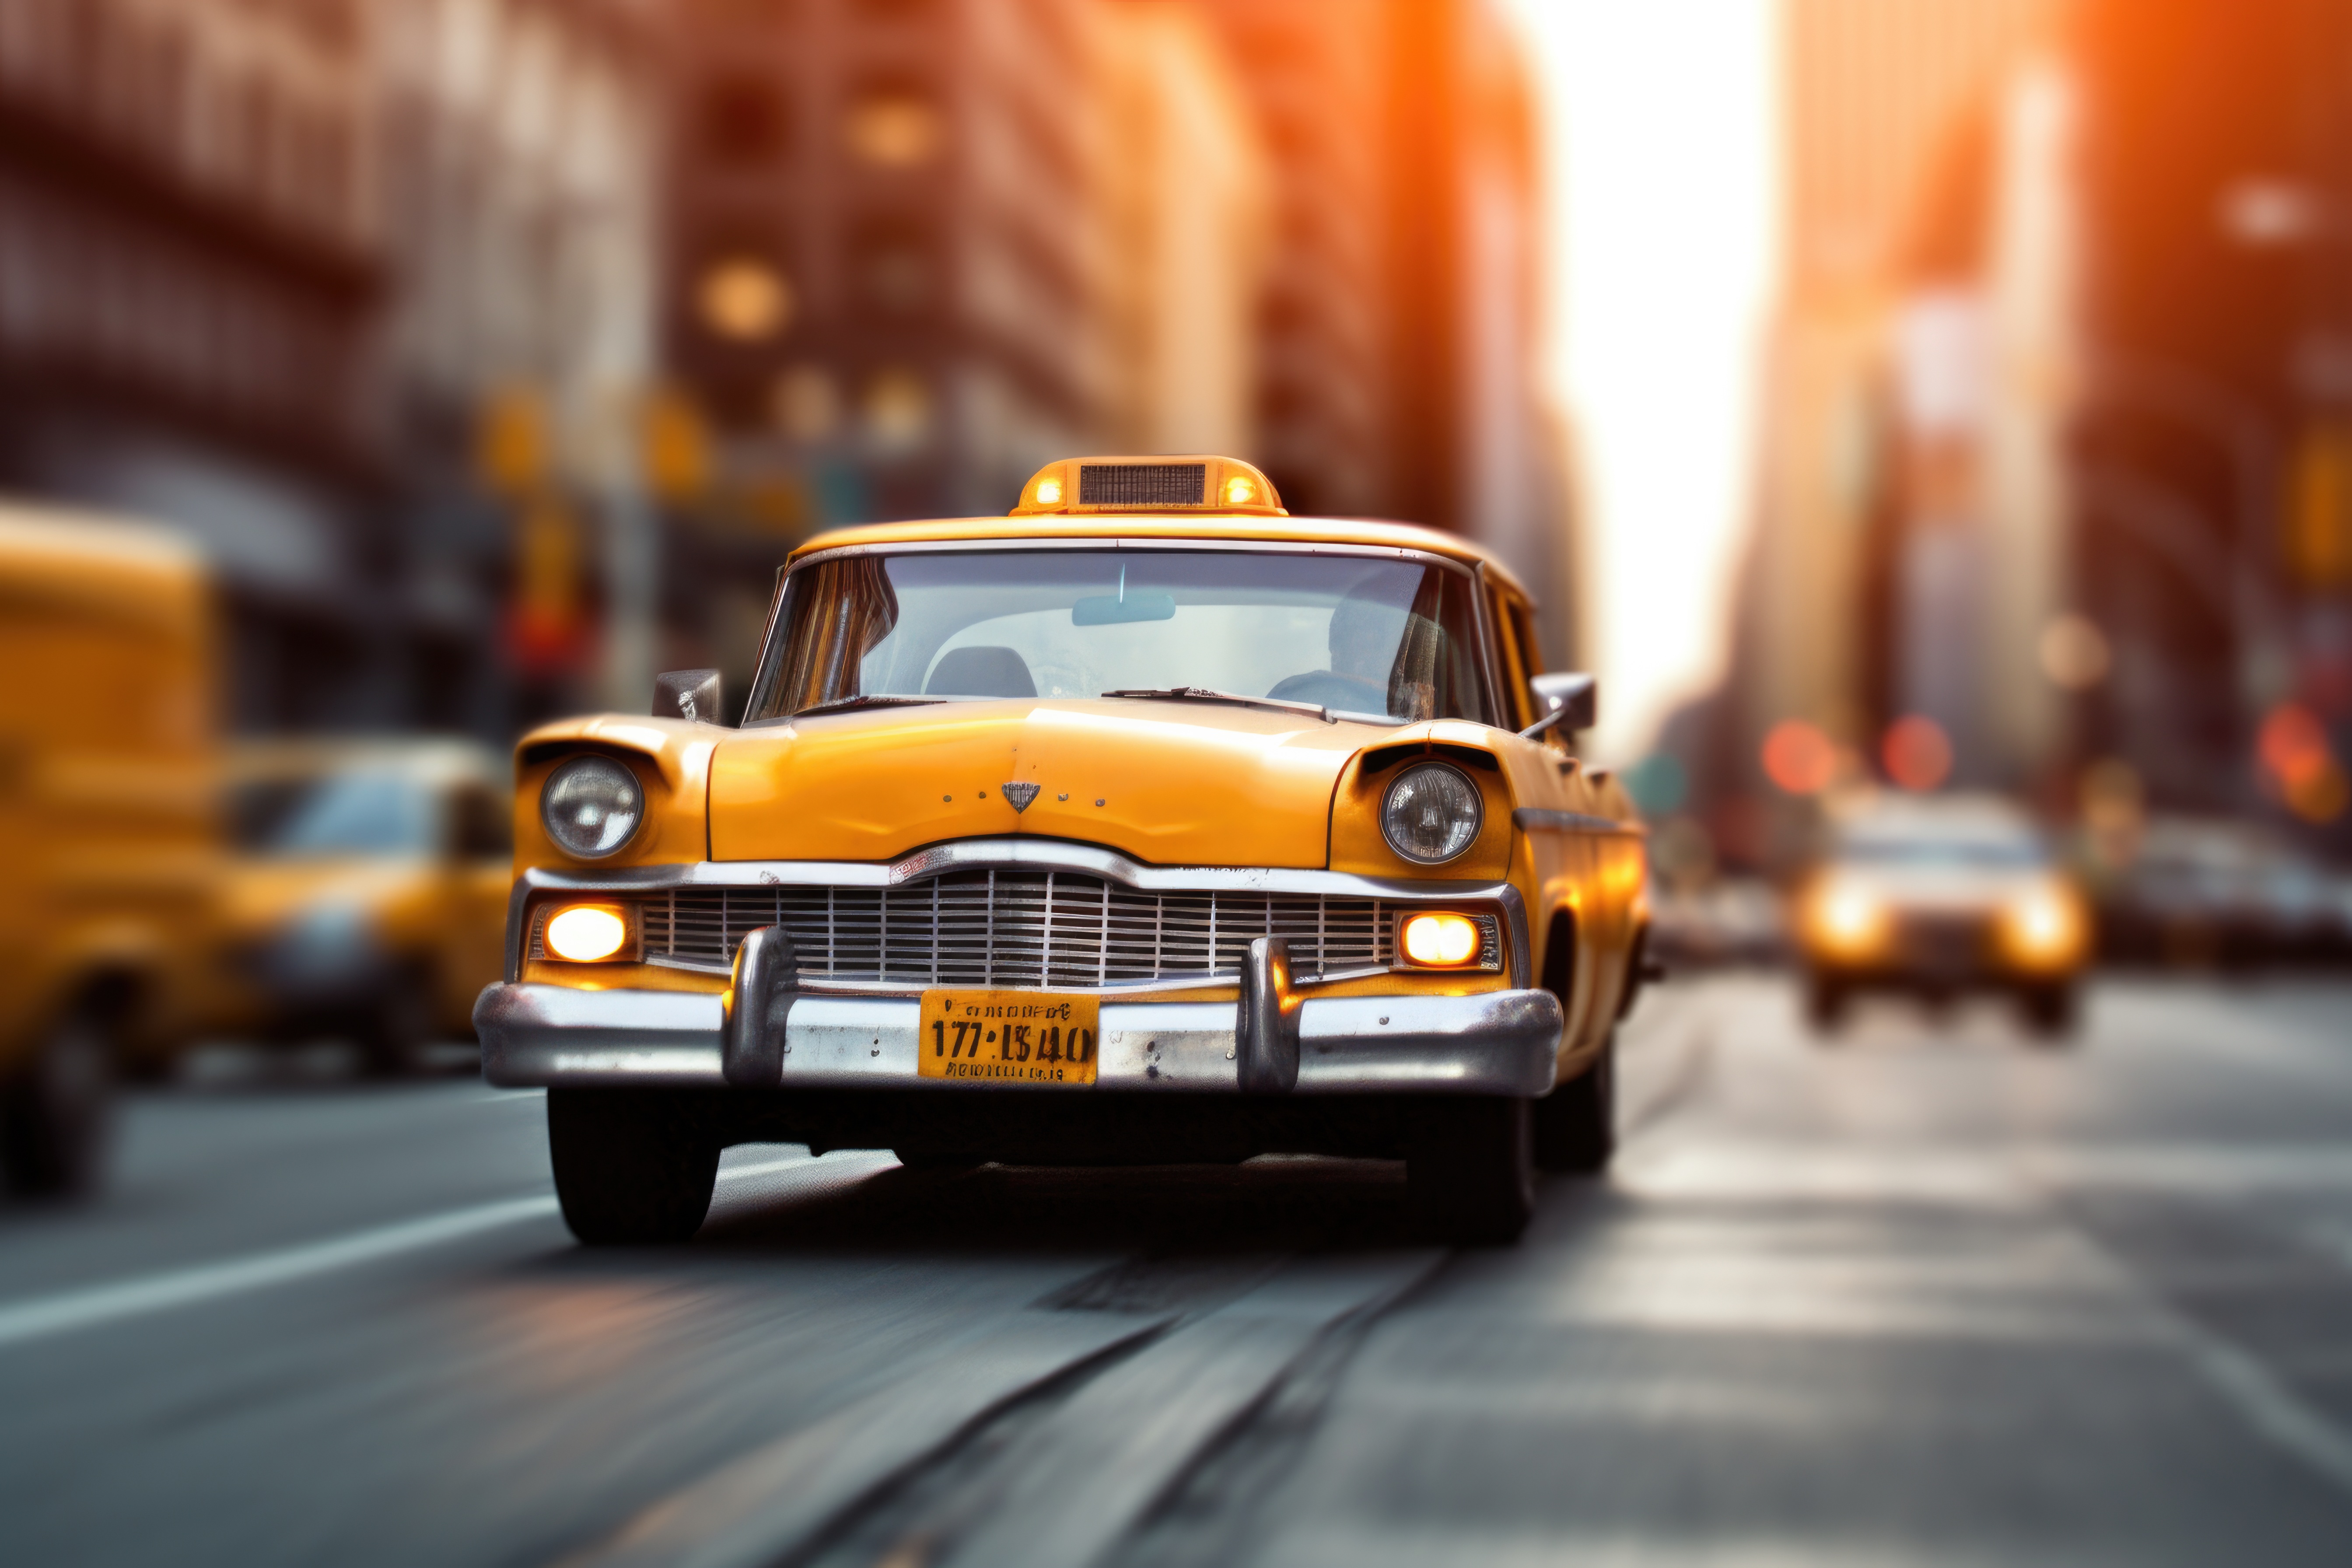 Premium Photo | A yellow taxi cab is seen driving down the street